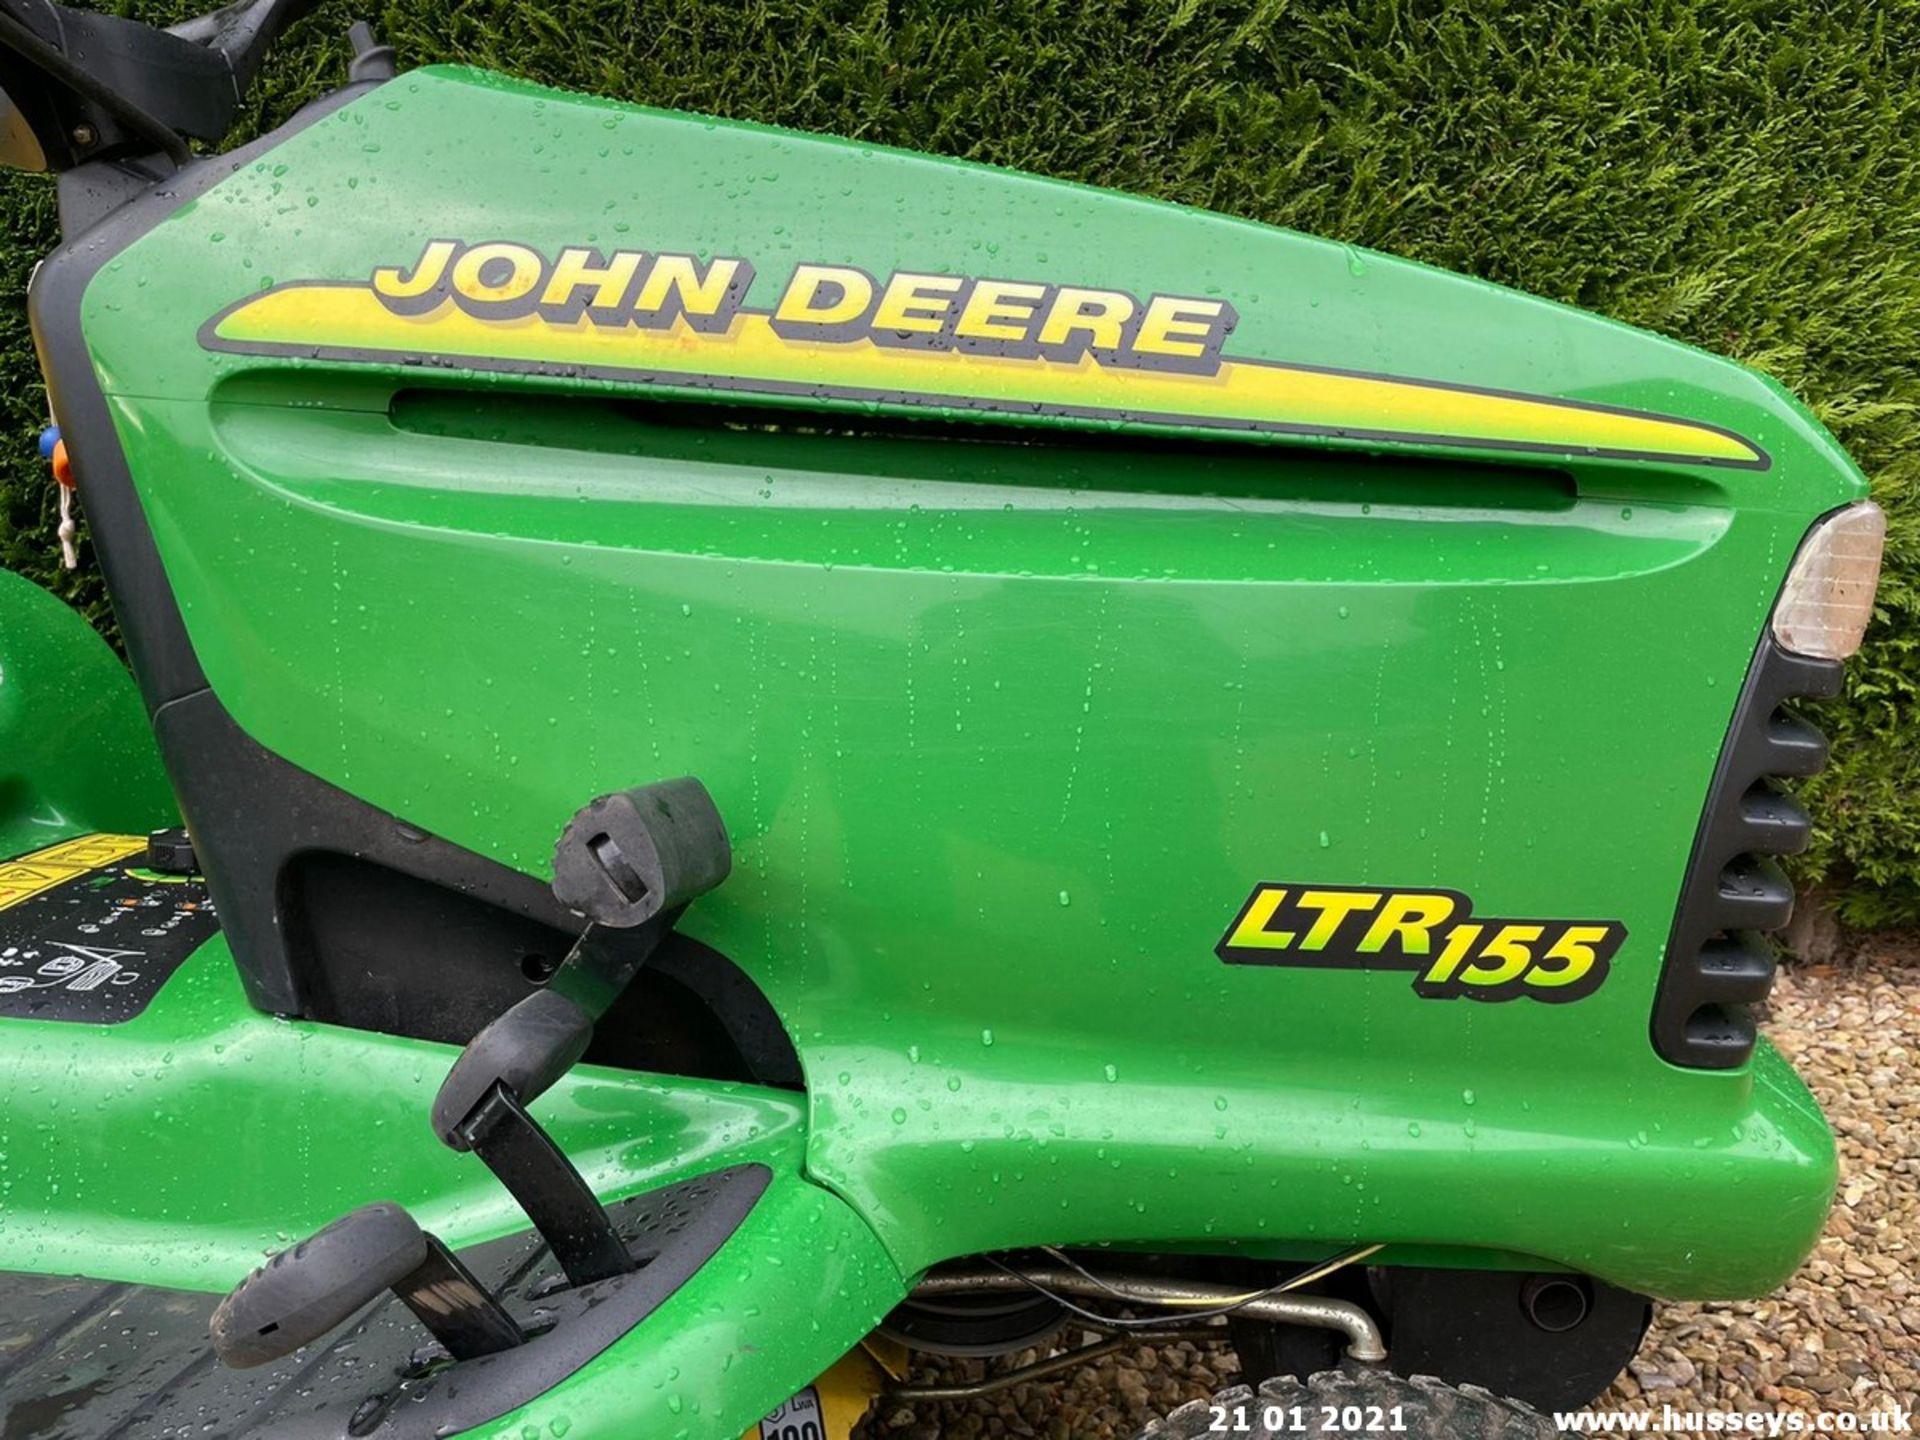 JOHN DEERE LTR155 RIDE ON MOWER C.W COLLECTOR - Image 5 of 11